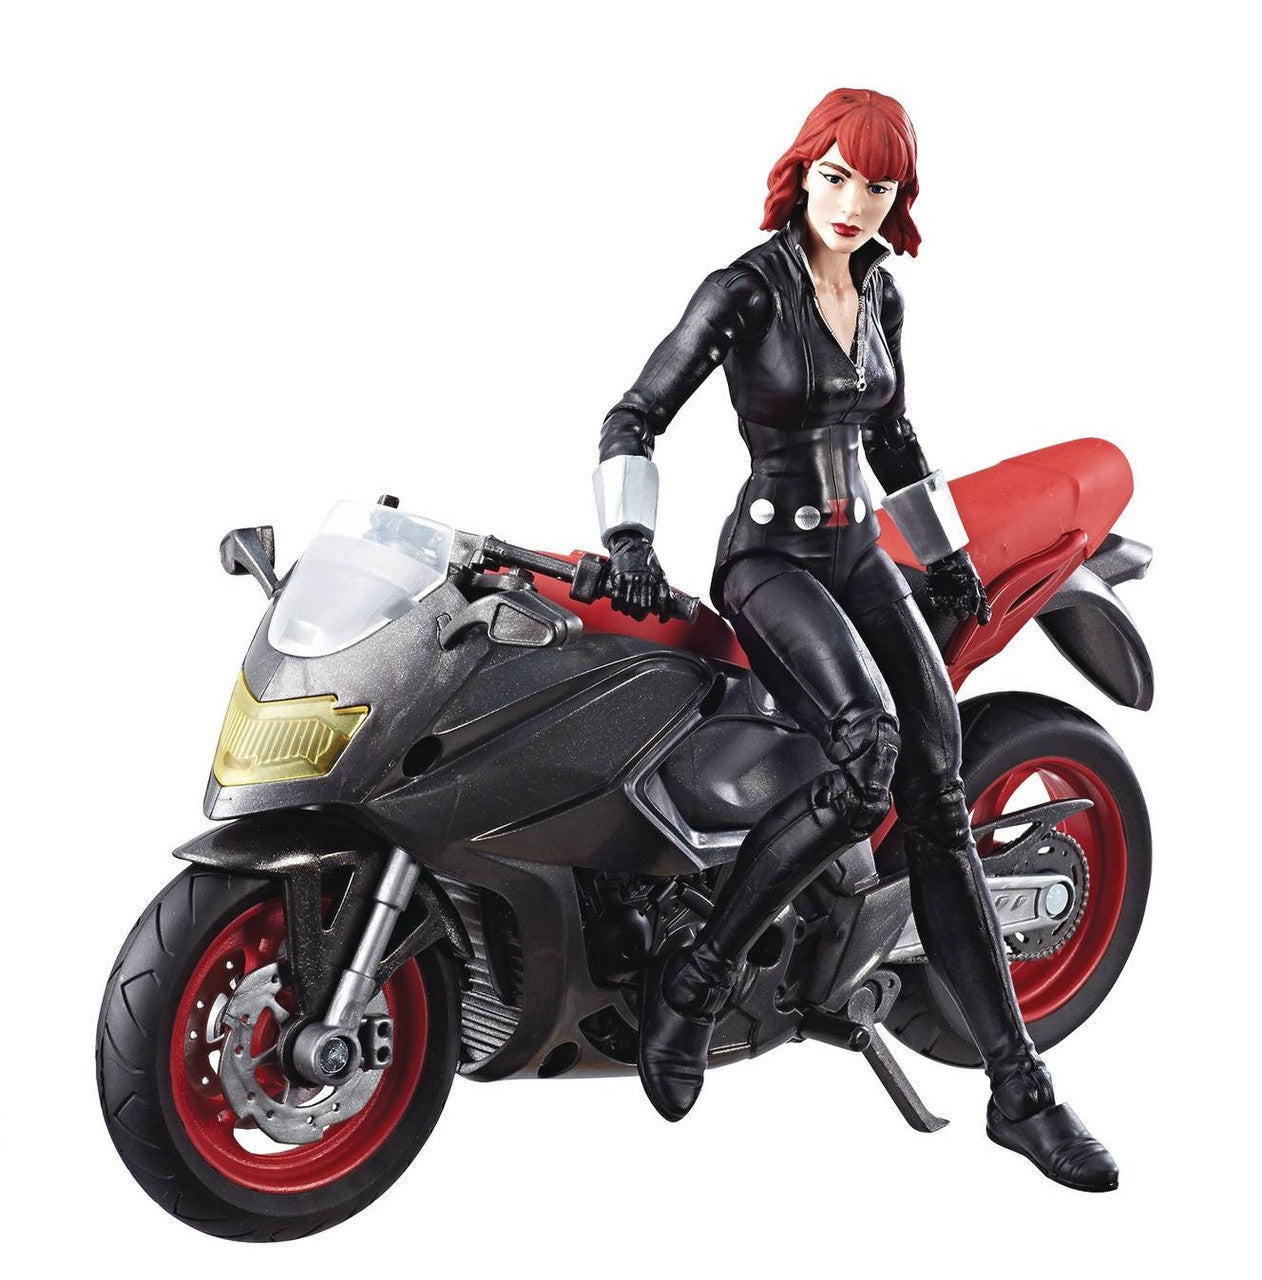 Marvel Legends Ultimate Black Widow with Motorcycle by Hasbro